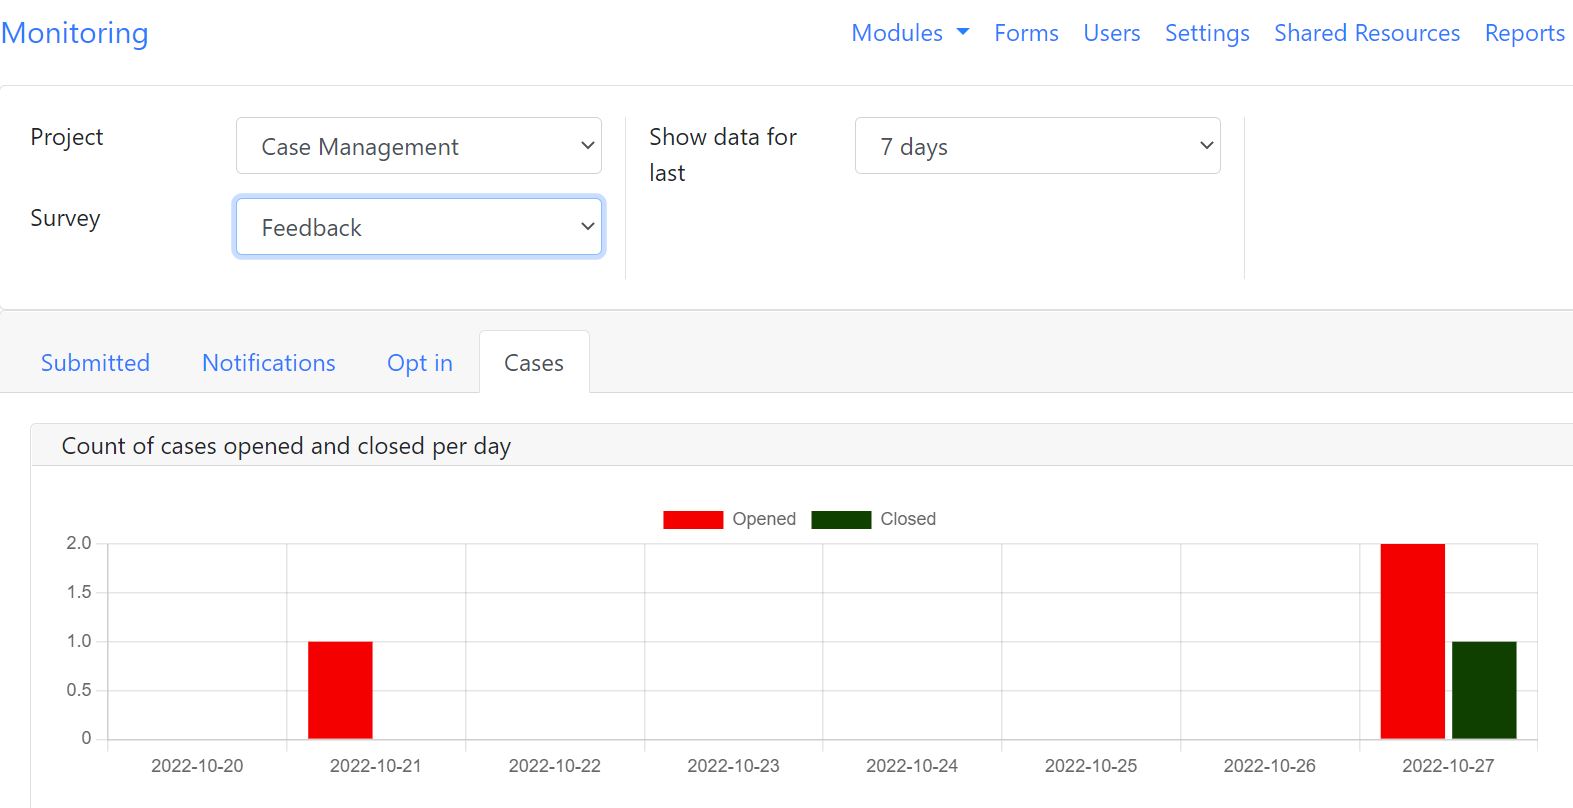 The monitoring page showing cases created and closed per day as a bar chart